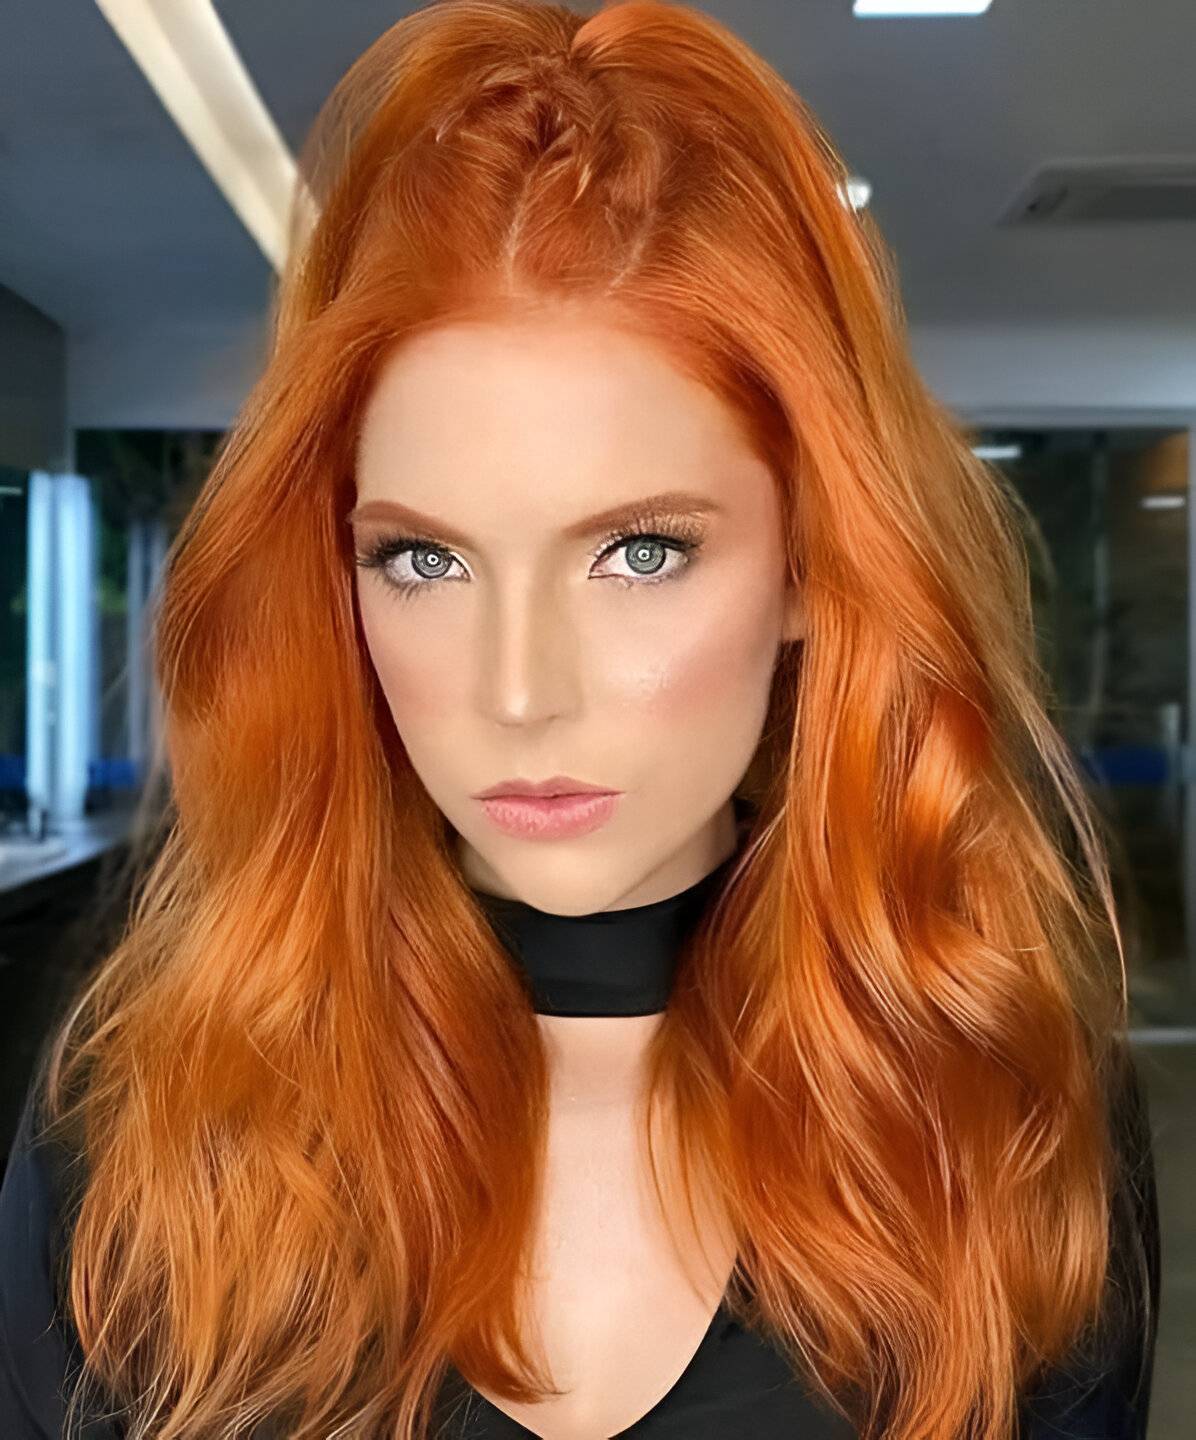 25 Gorgeous Orange Hair Ideas To Look Stunning Like A Model - 191